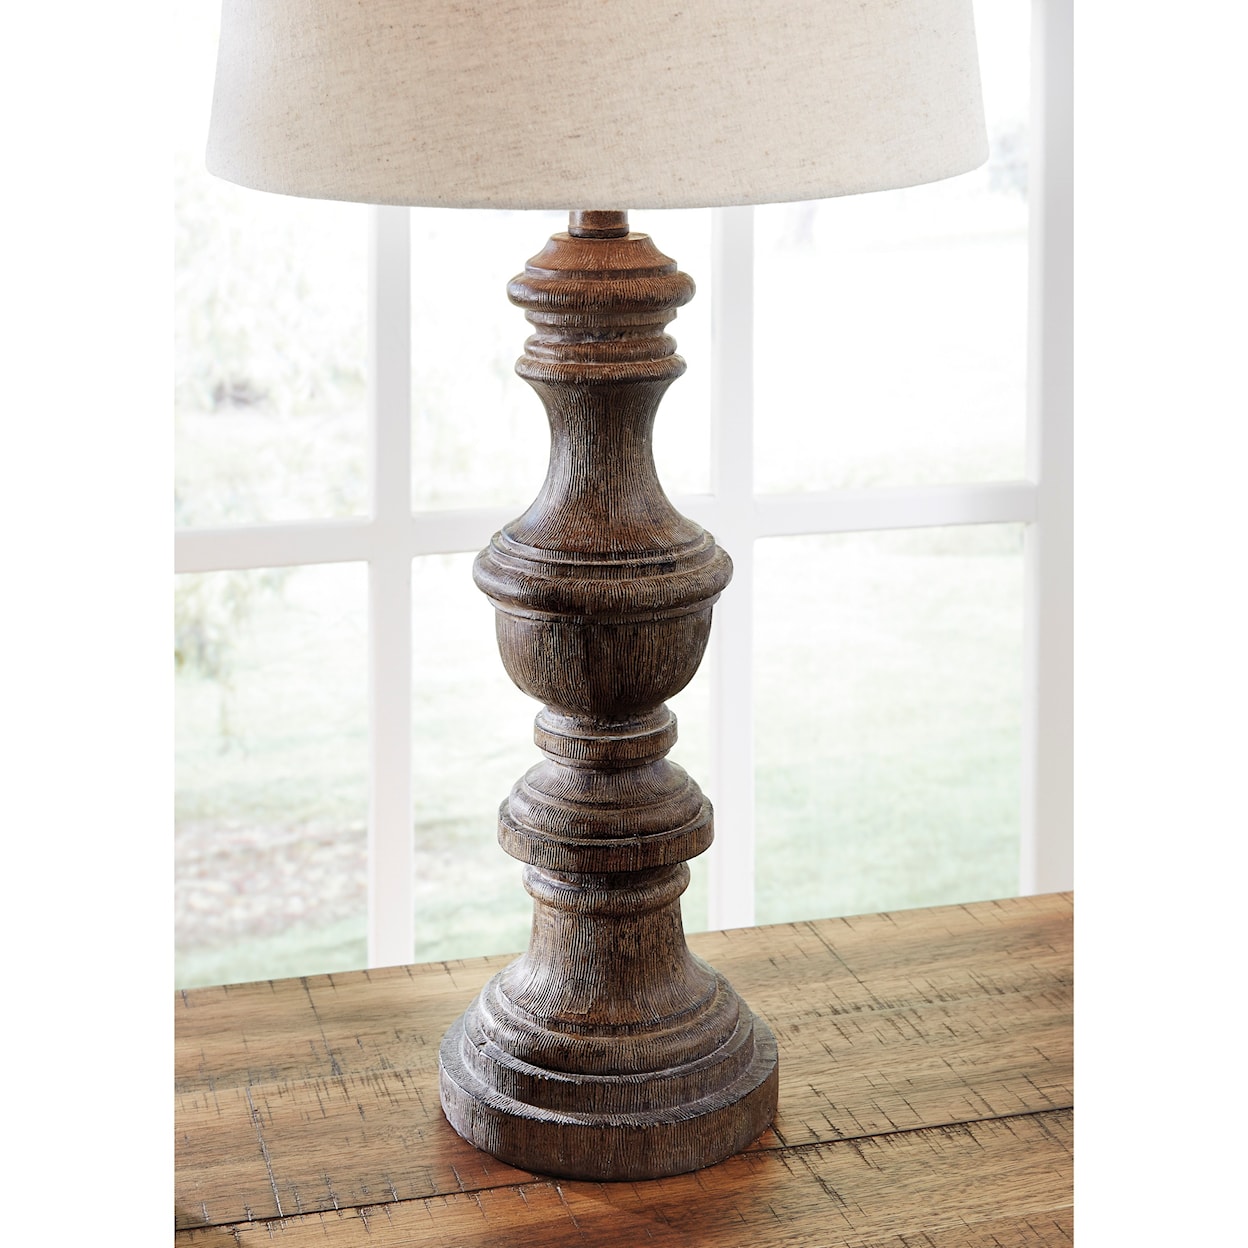 Signature Design by Ashley Lamps - Casual Set of 2 Magaly Brown Faux Wood Table Lamps